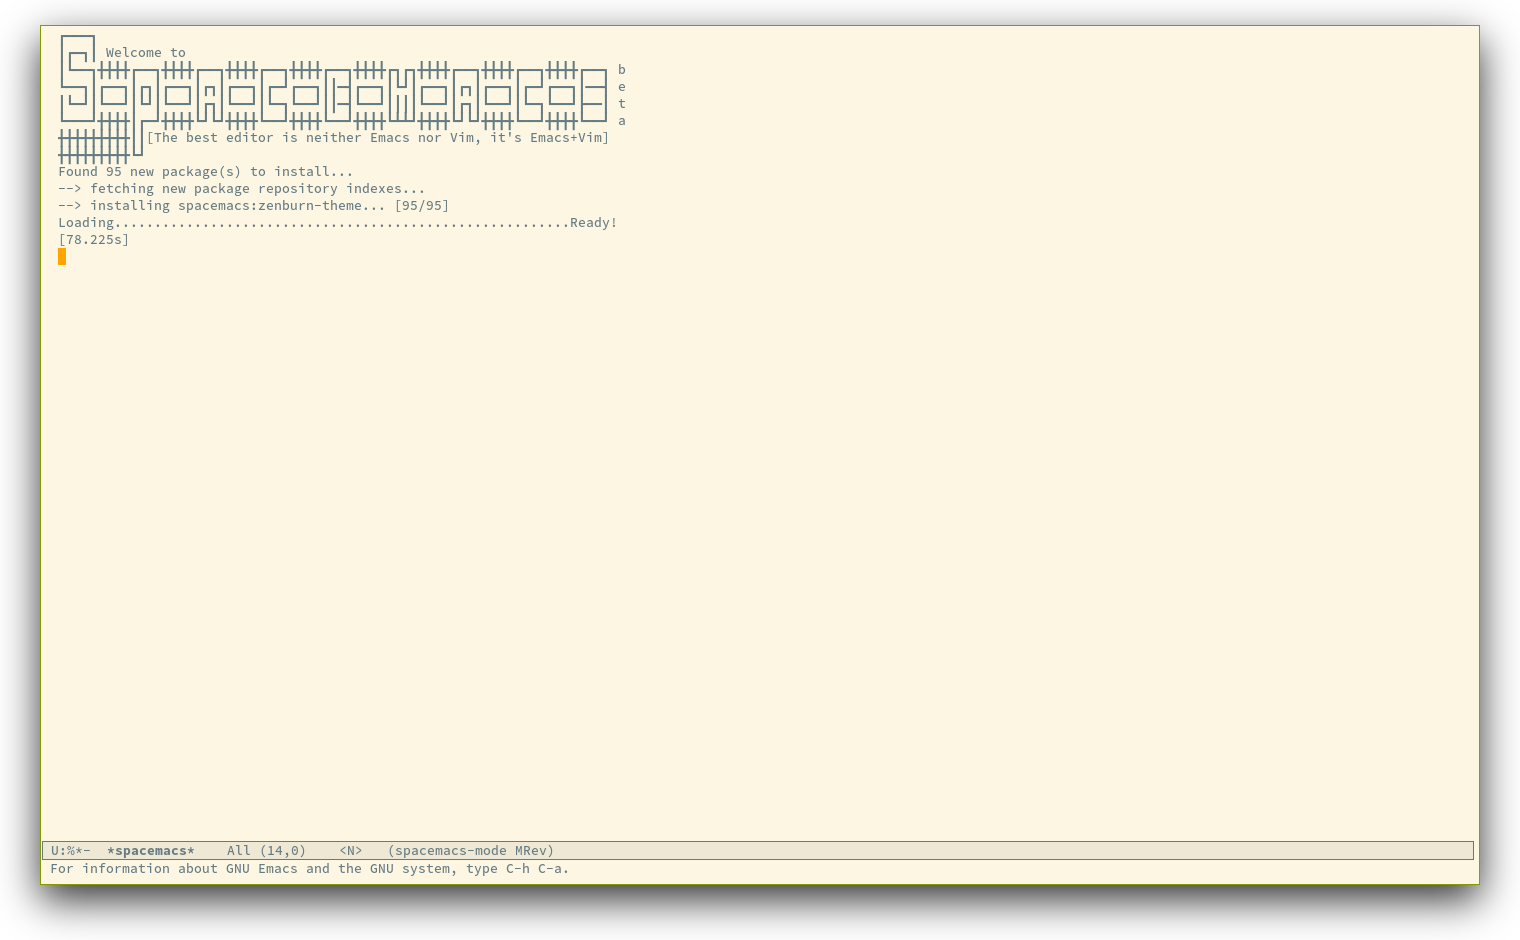 /TakeV/spacemacs/media/commit/34e7454d1190b61bad41c311b63bfb68716a8079/doc/img/spacemacs-startup.png